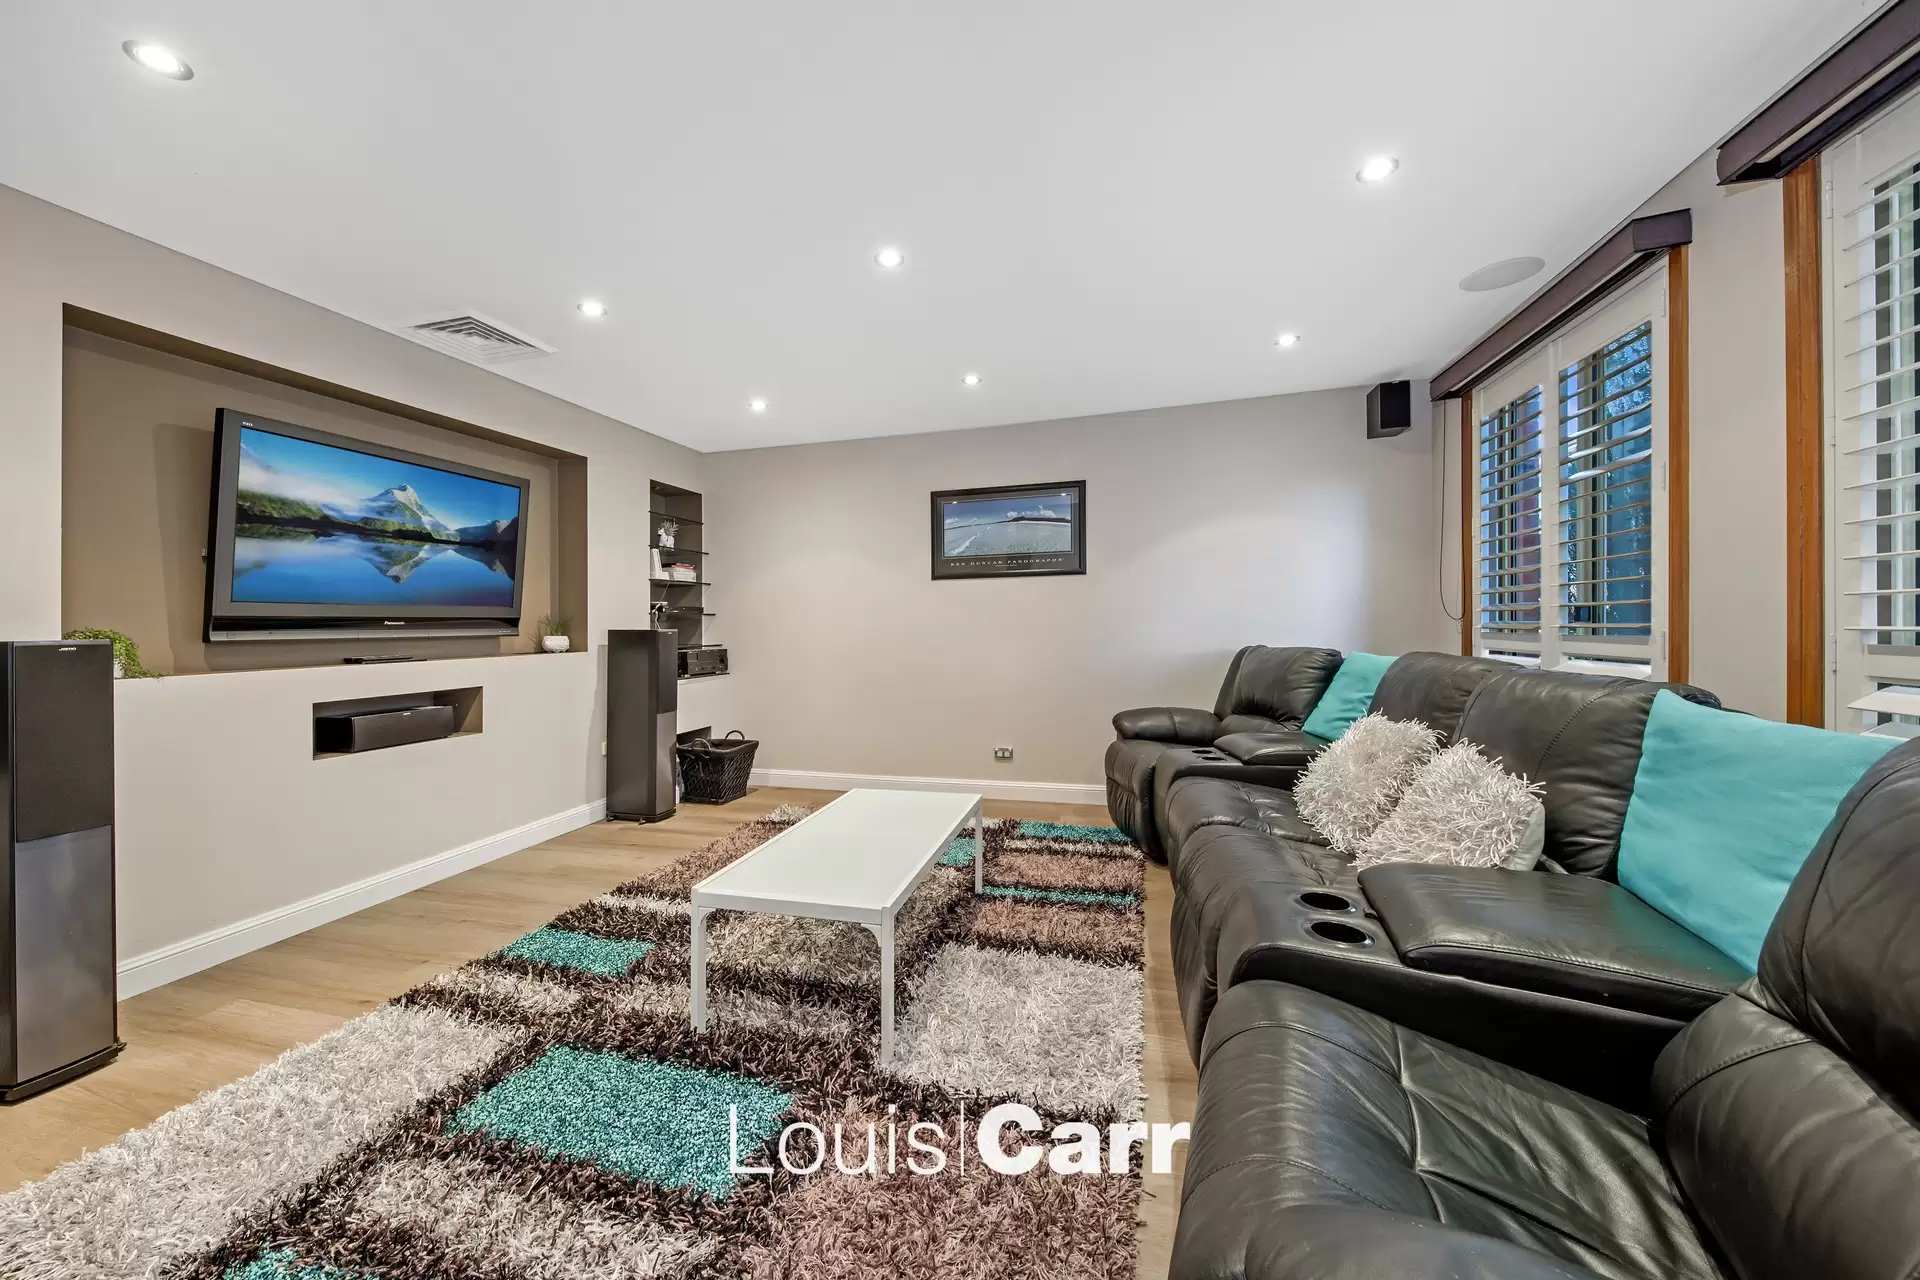 Photo #6: 4 Rooke Court, Kellyville - Sold by Louis Carr Real Estate